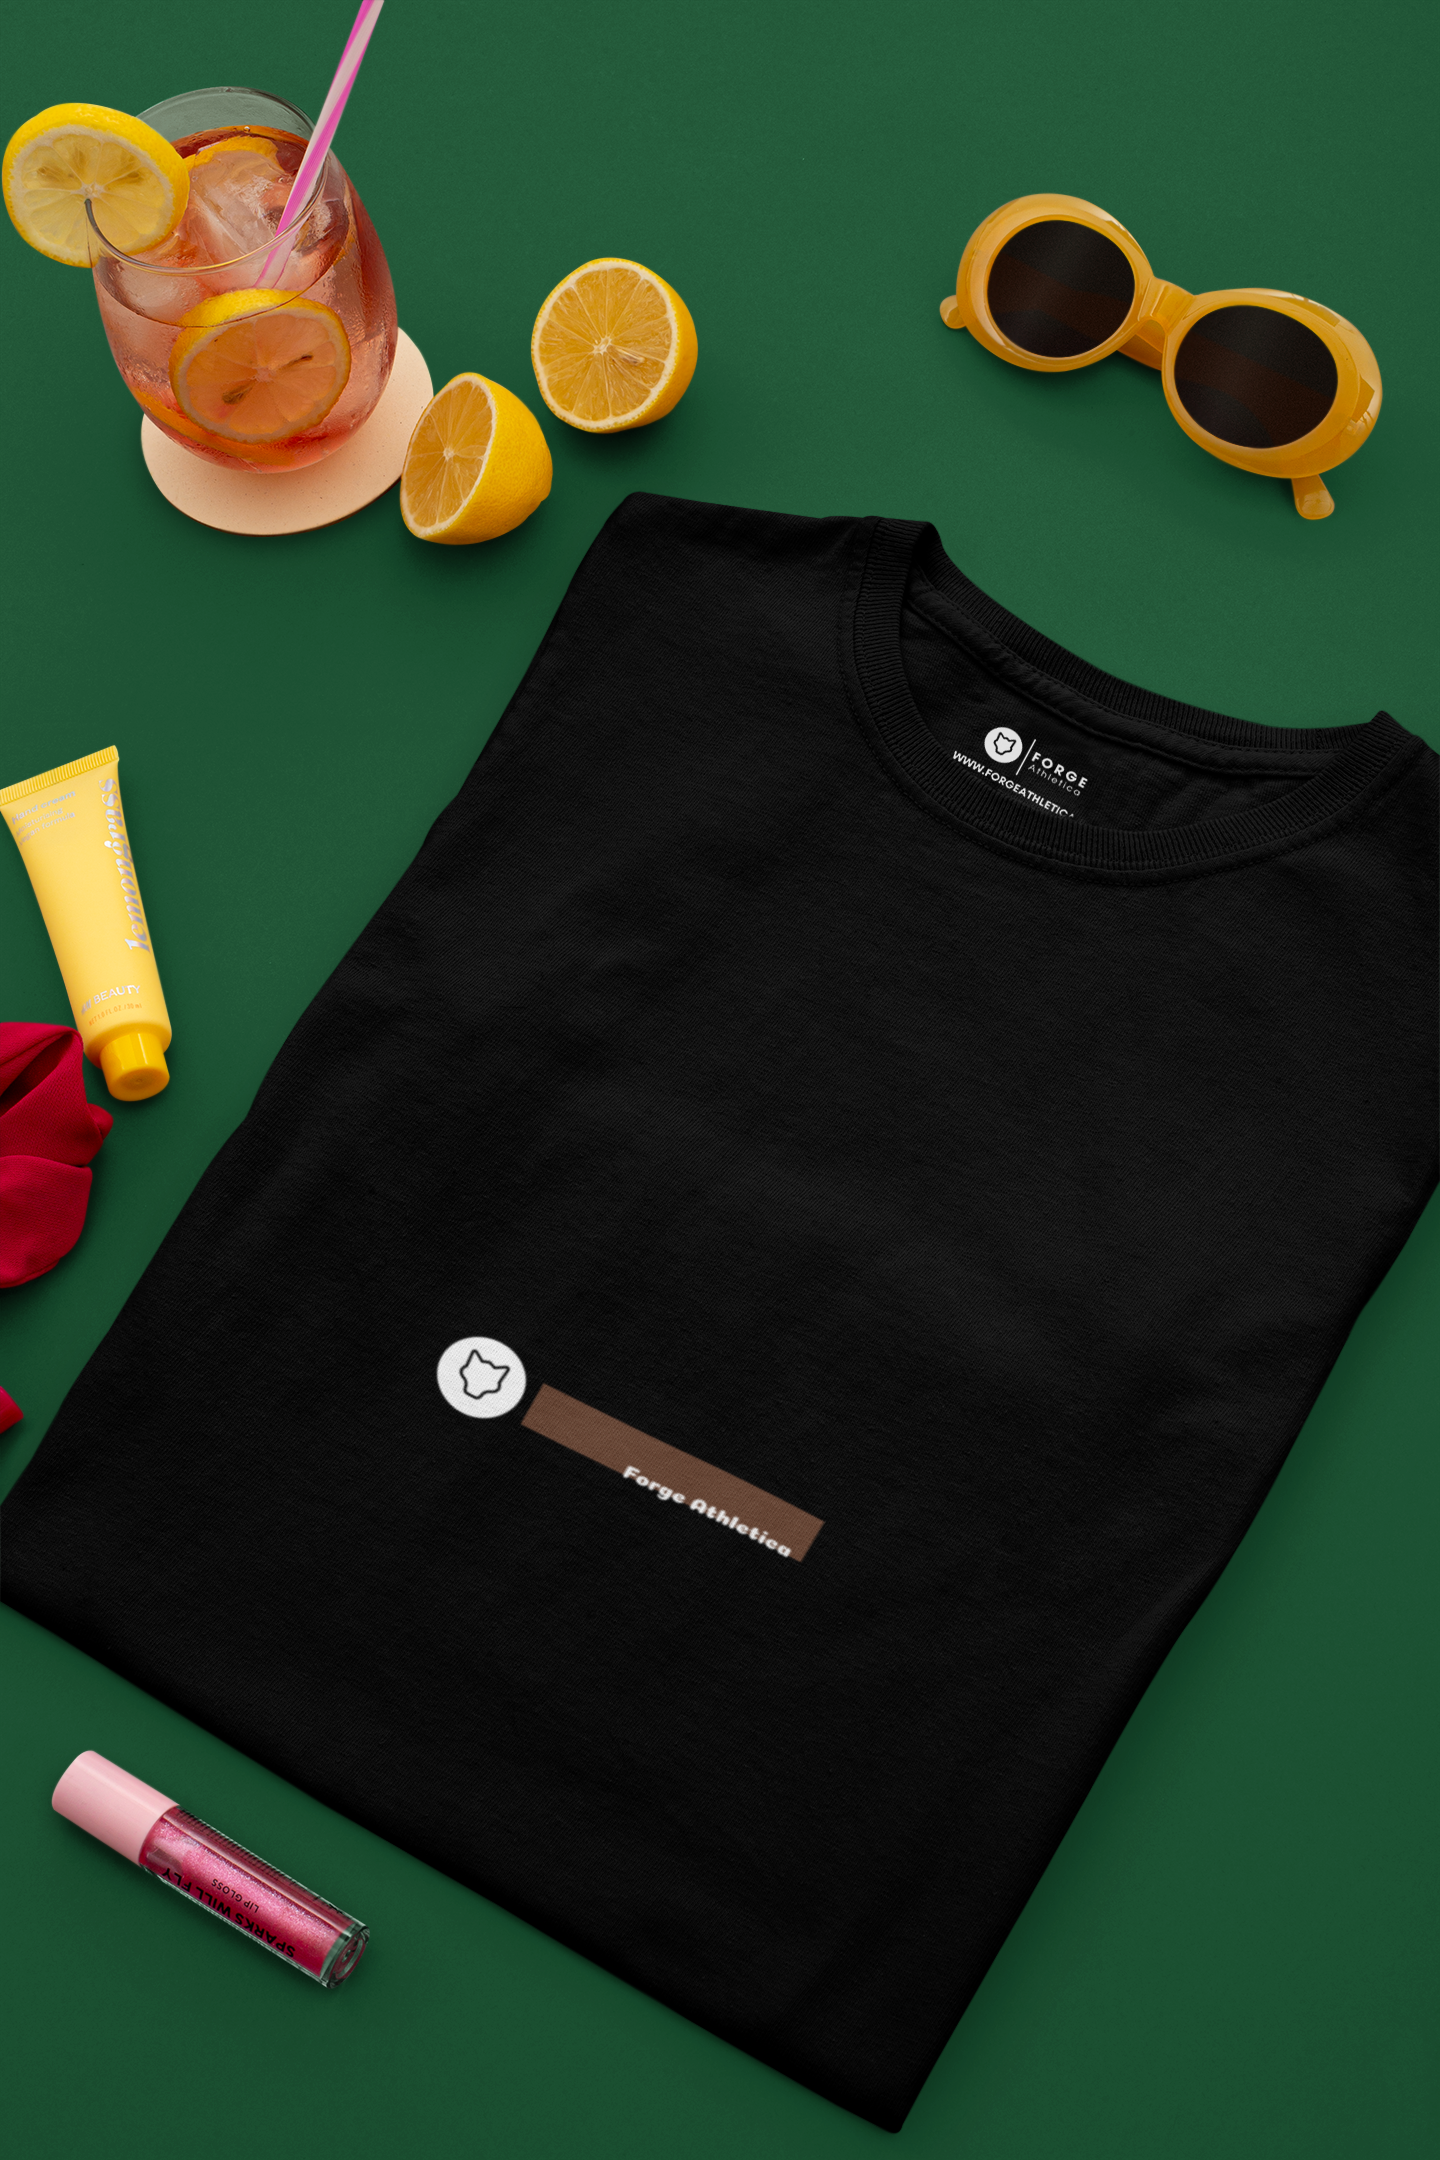 Premium 180GSM organic cotton T-Shirt folded and kept on a flat surface with yellow sunglasses, lip gloss and a glass of lemonade.